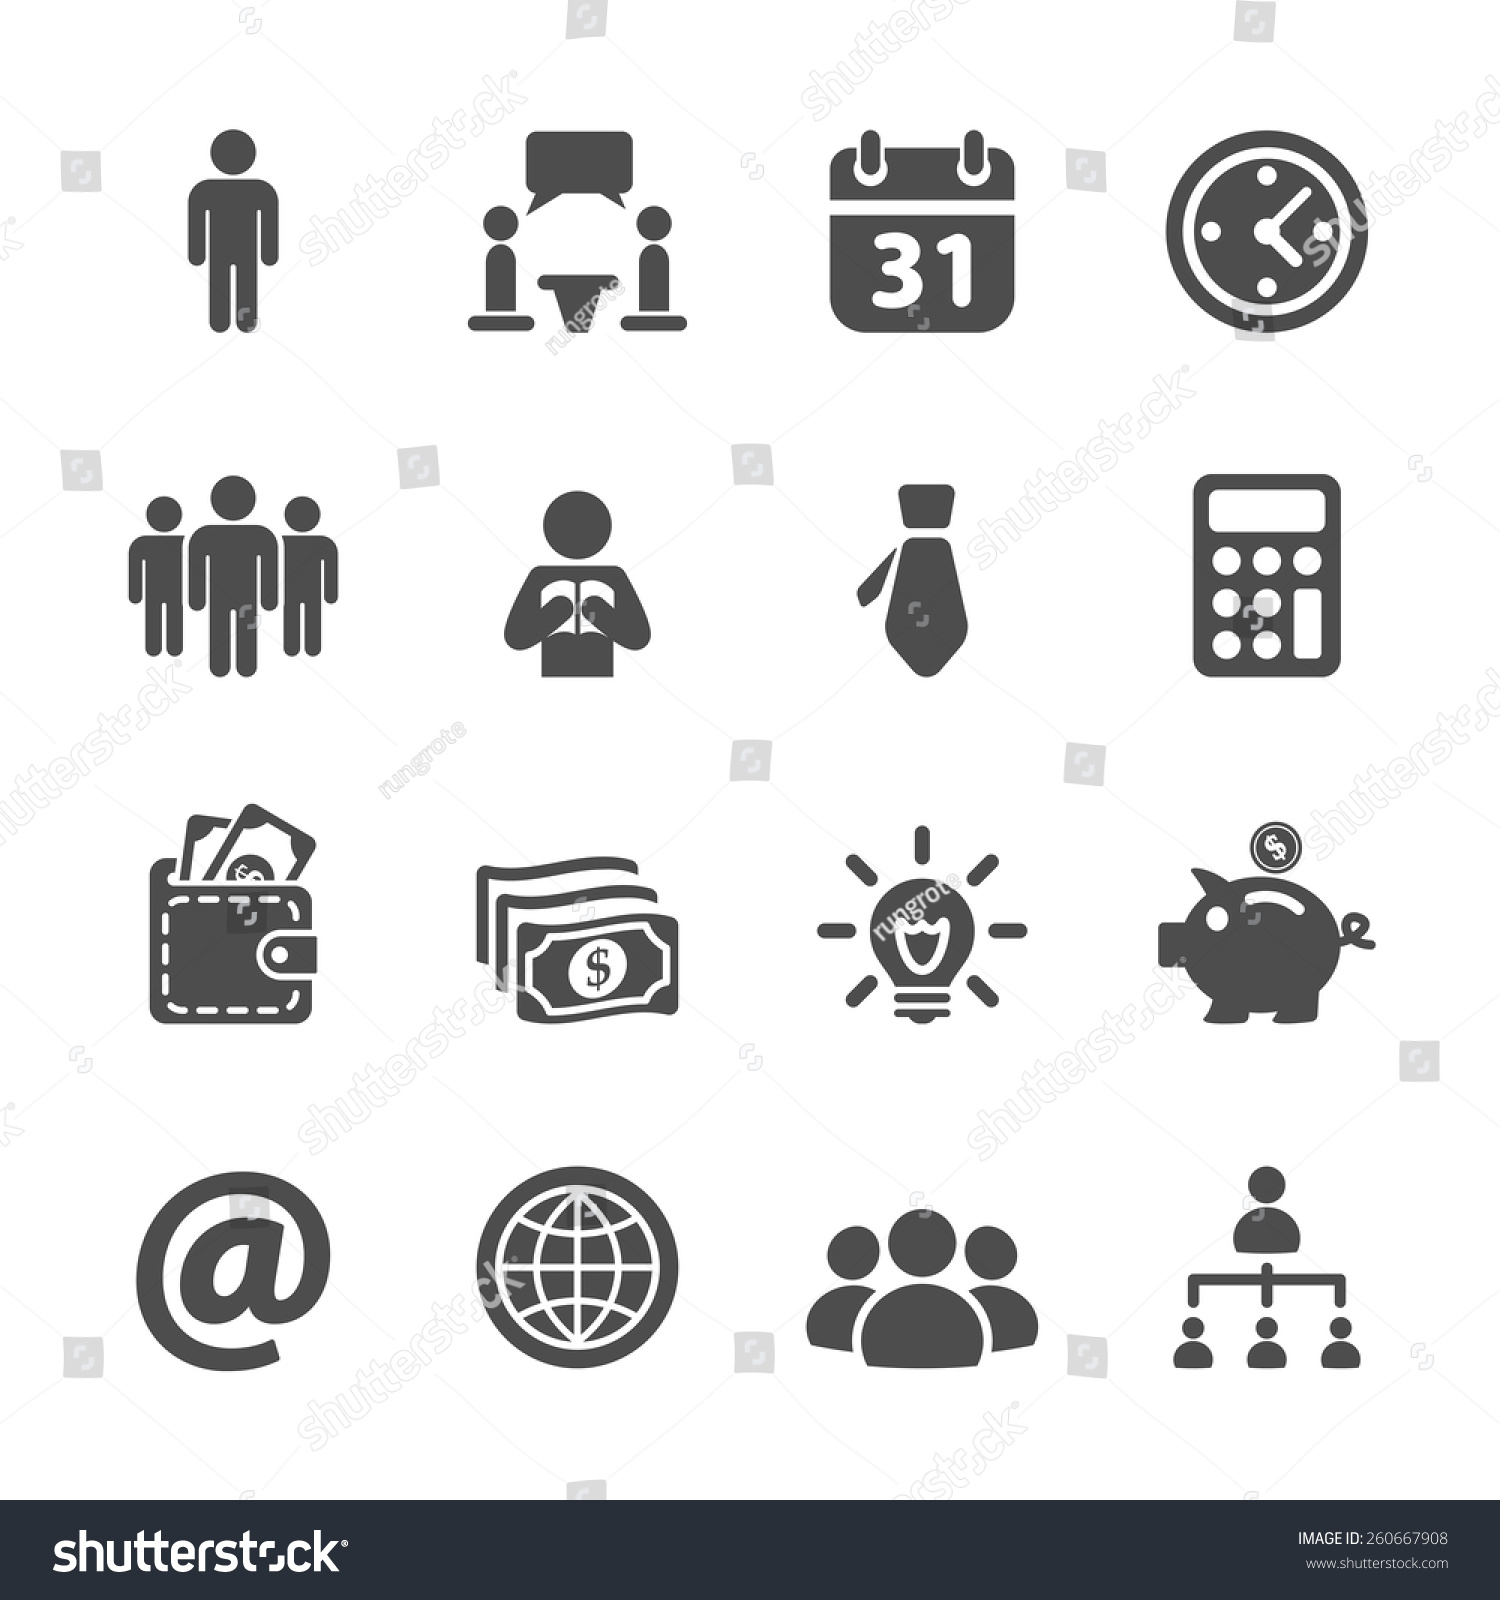 Isolated corporate icon hierarchy element Vector Image